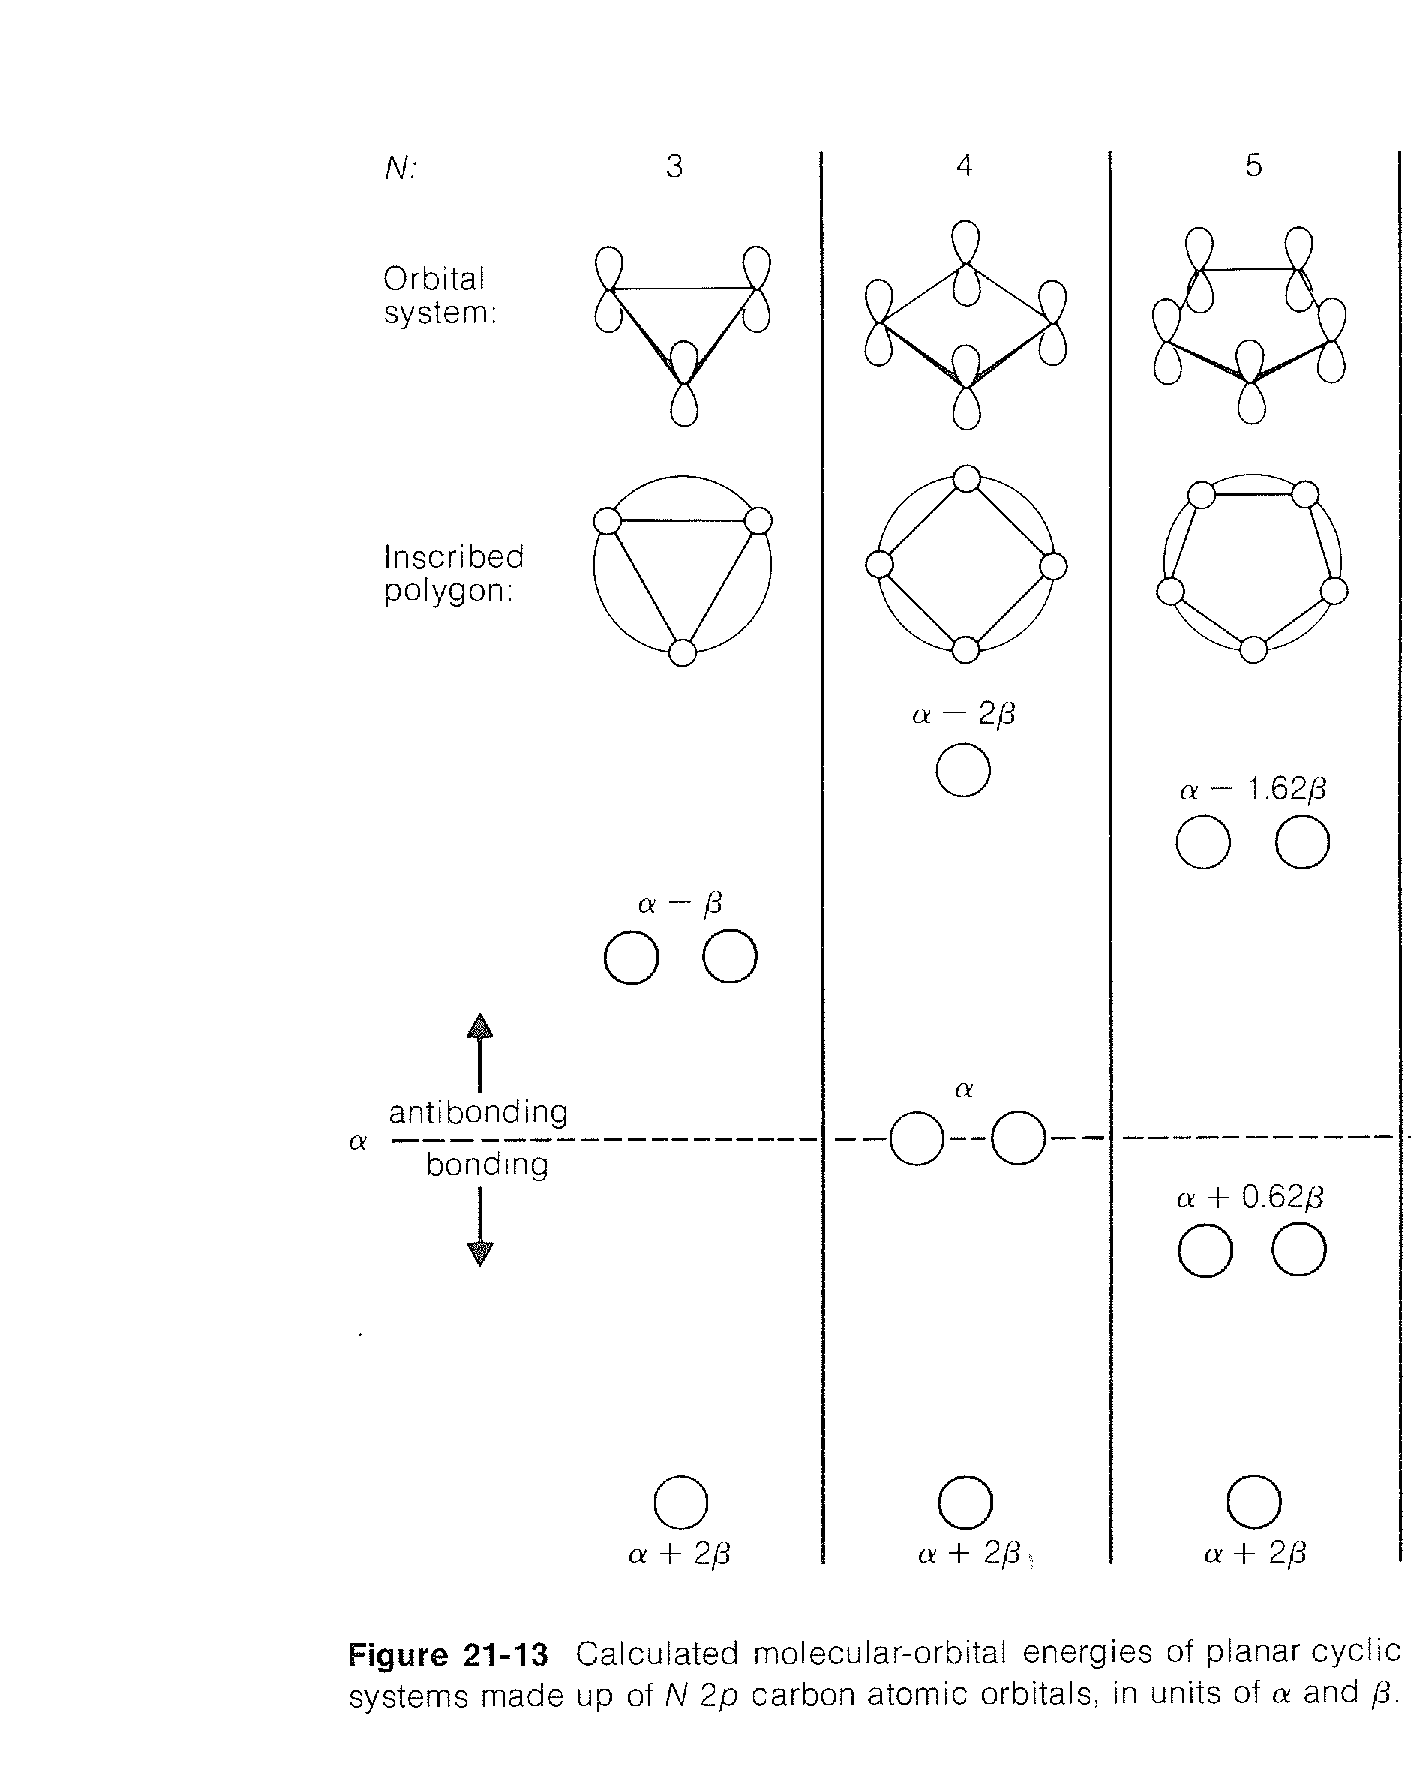 Figure 21-13 Calculated molecular-orbital energies of planar cyclic systems made up of N 2p carbon atomic orbitals, in units of a and fi.